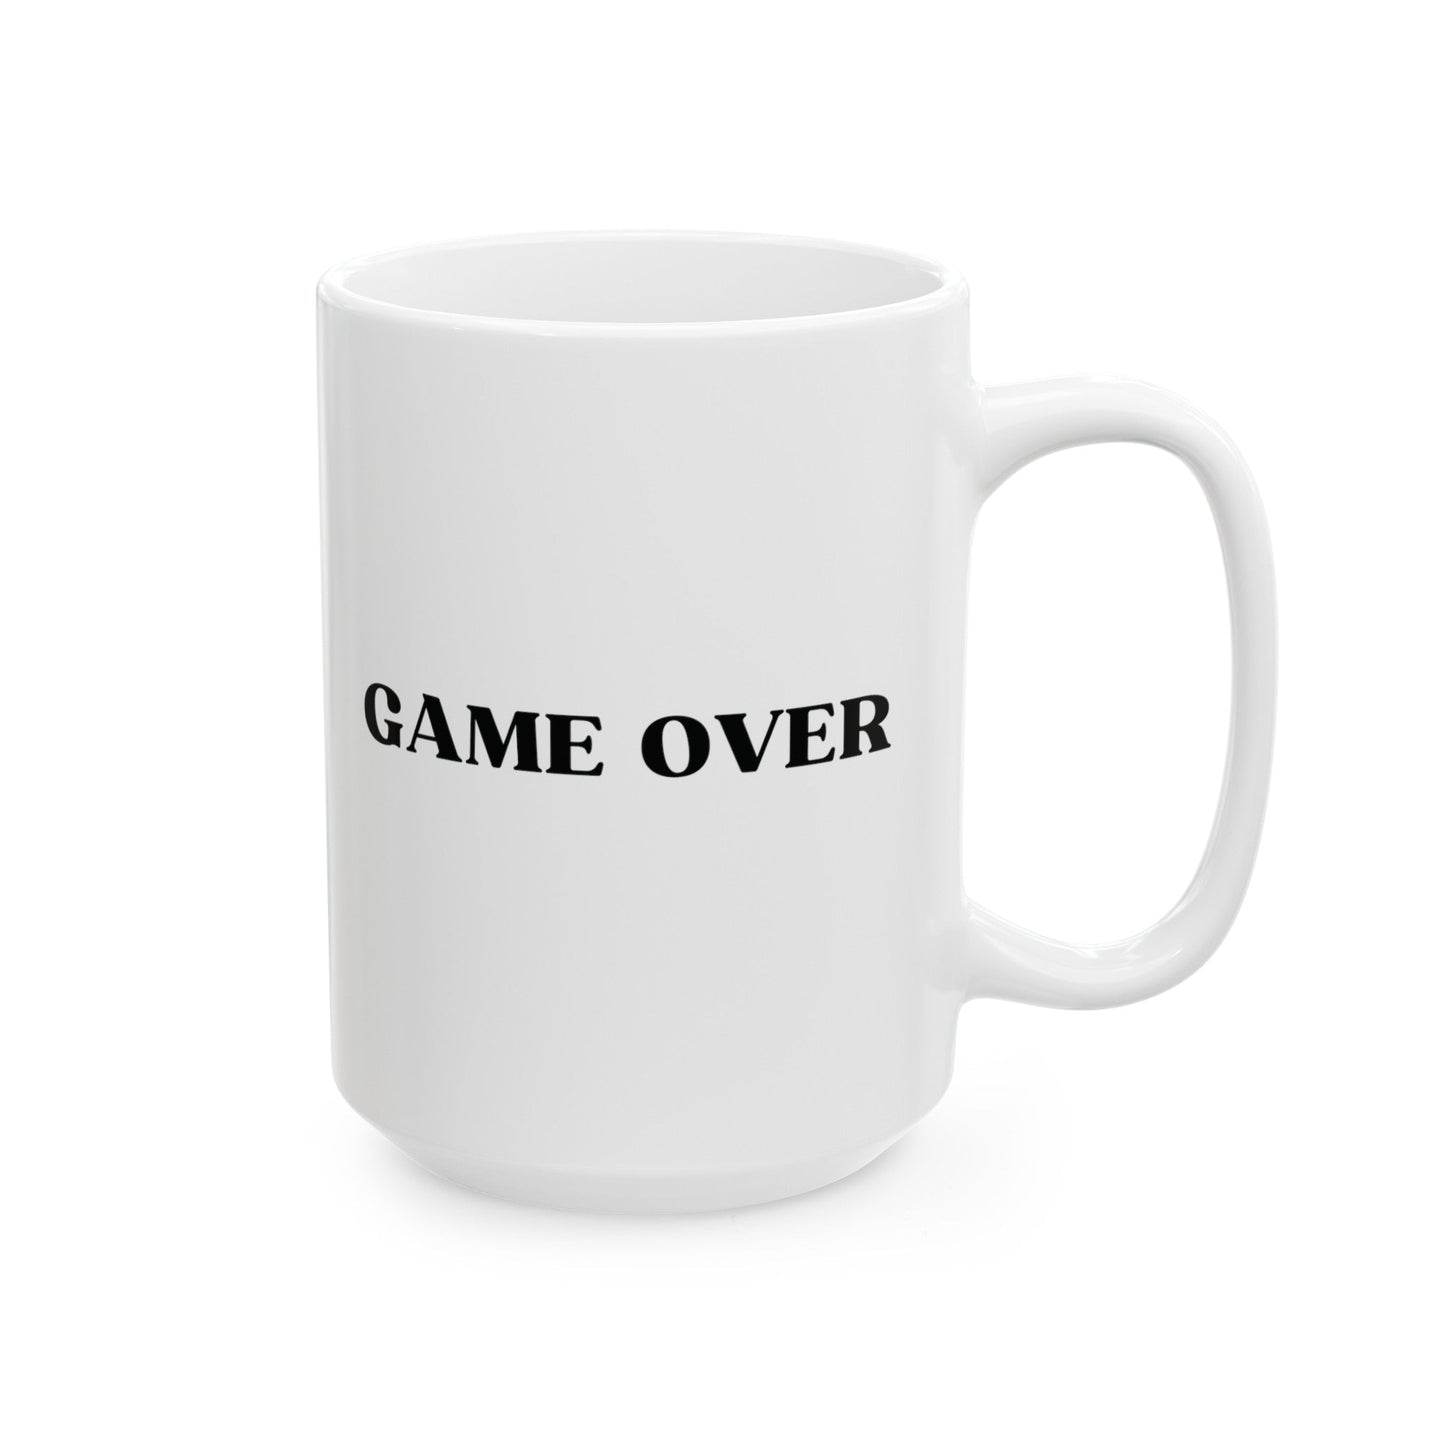 Game Over | Funny Gamer Inspired Cup, Video Game Coffee Cup, Office Or Geek Gift | White Coffee Mug (11/15oz) - Moikas